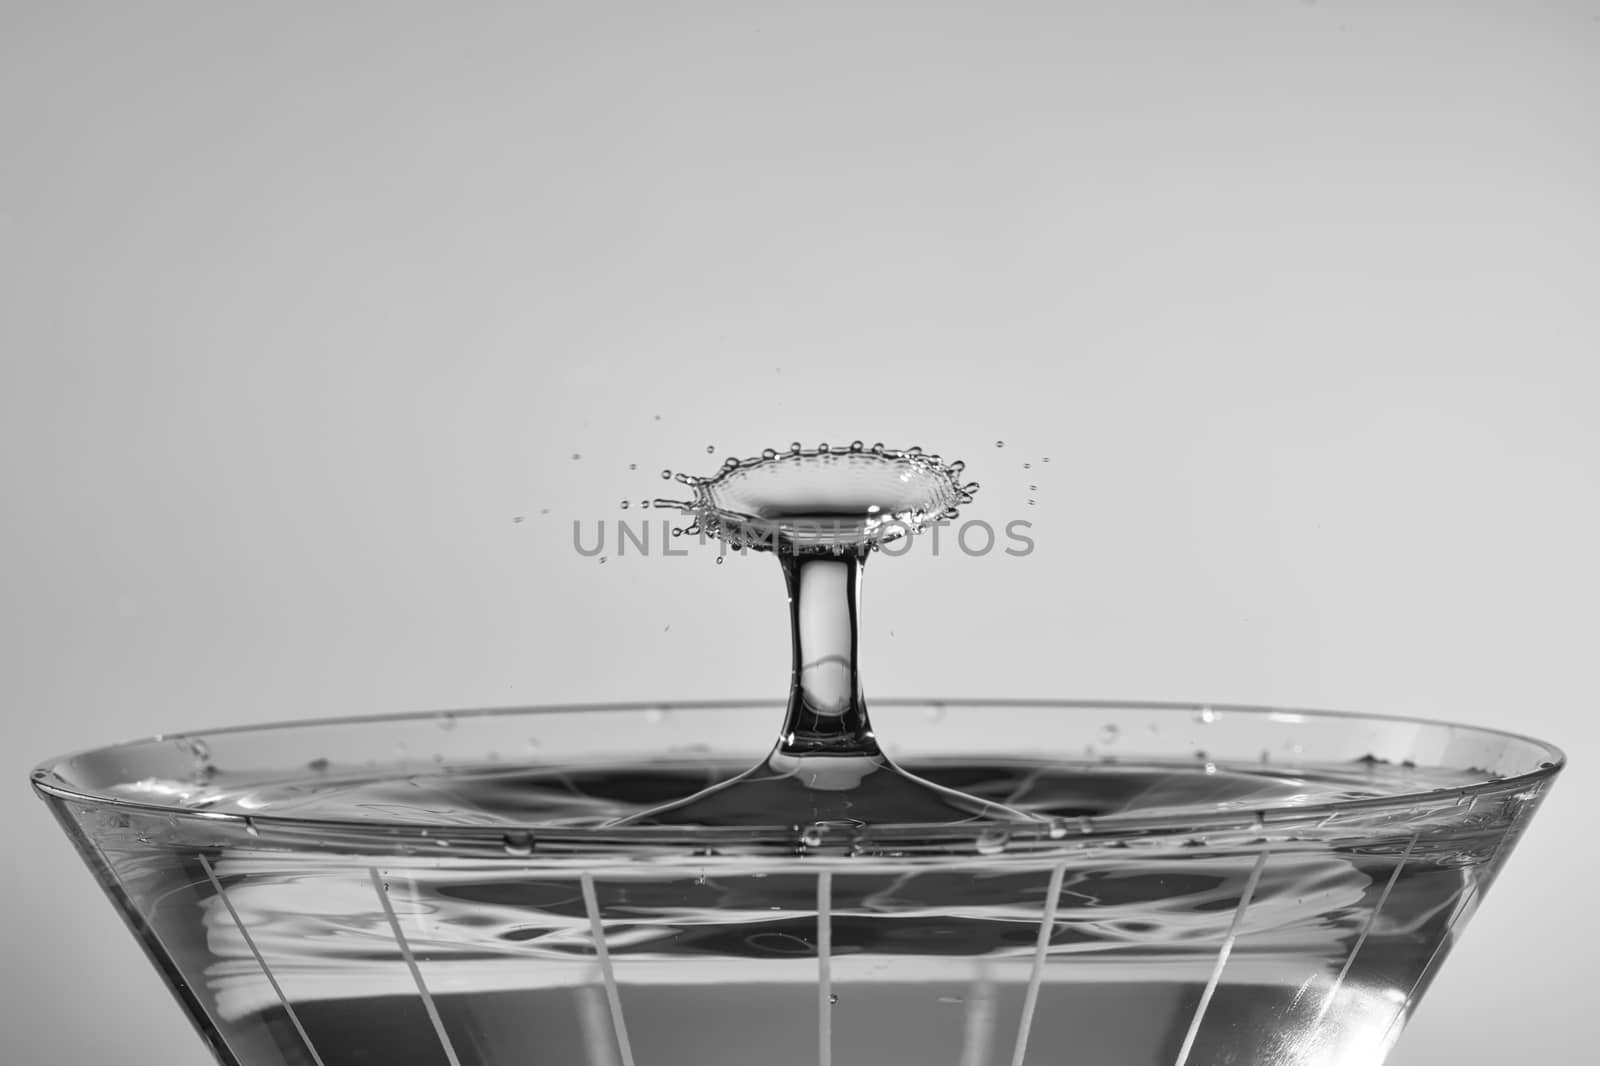 Droplets collide above martini glass, creating a radial fan pattern. Processed as monochrome.